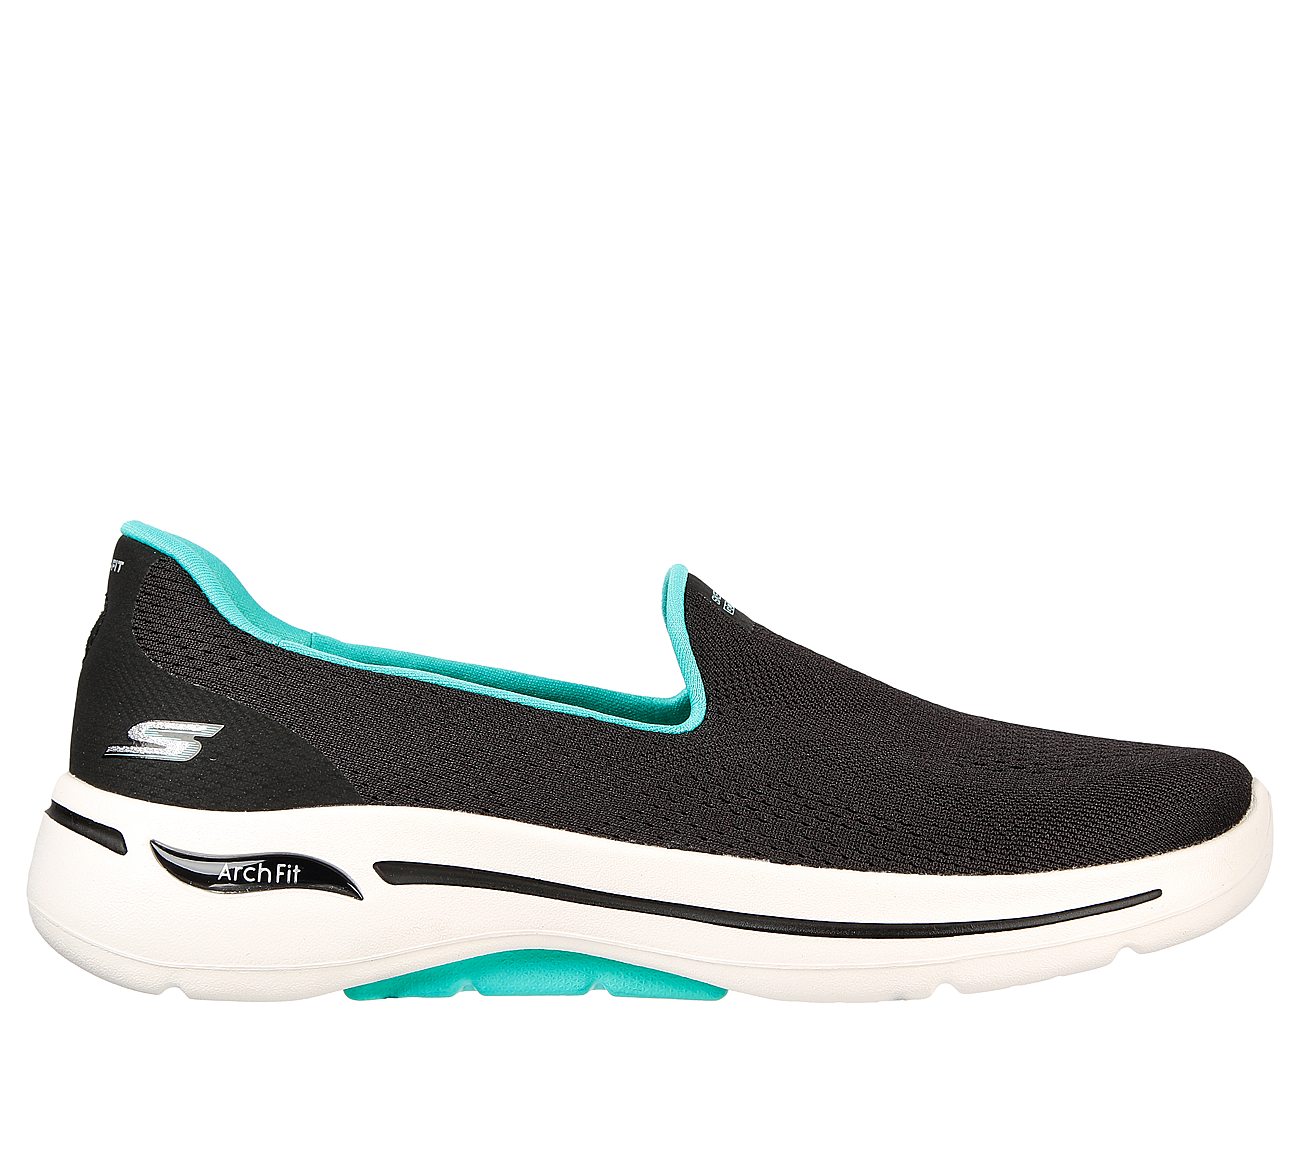 GO WALK ARCH FIT - IMAGINED, BLACK/TURQUOISE Footwear Lateral View